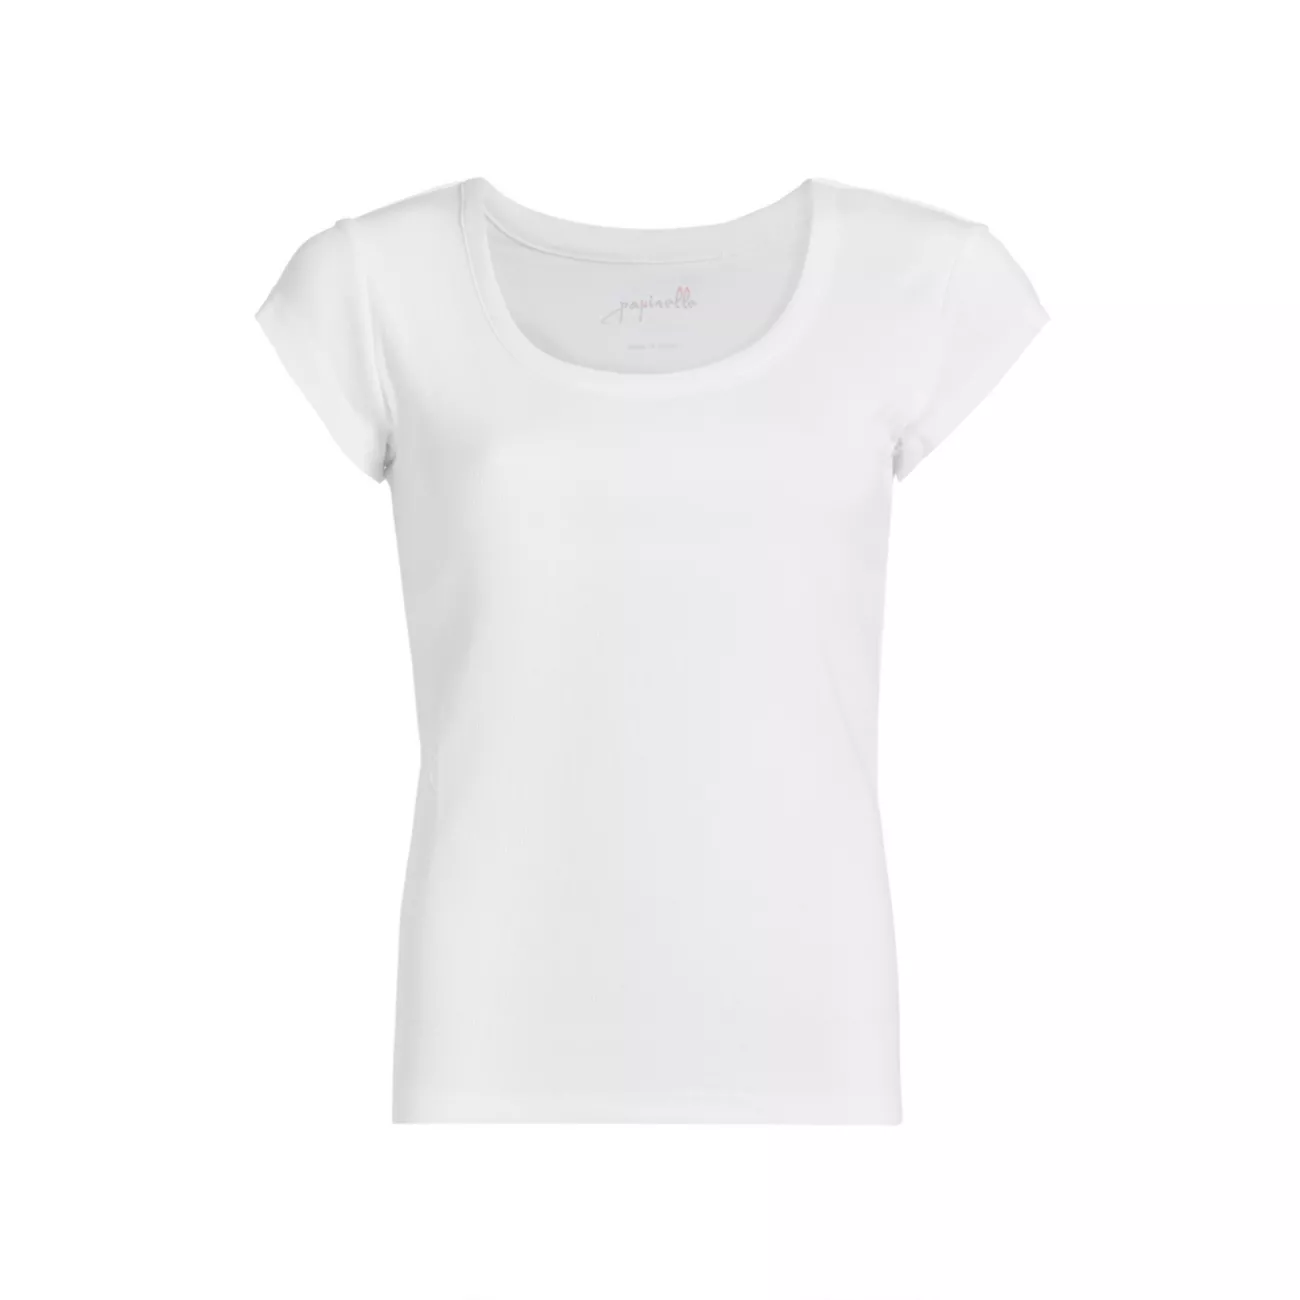 Milla Short-Sleeve Rib-Knit Top PAPINELLE